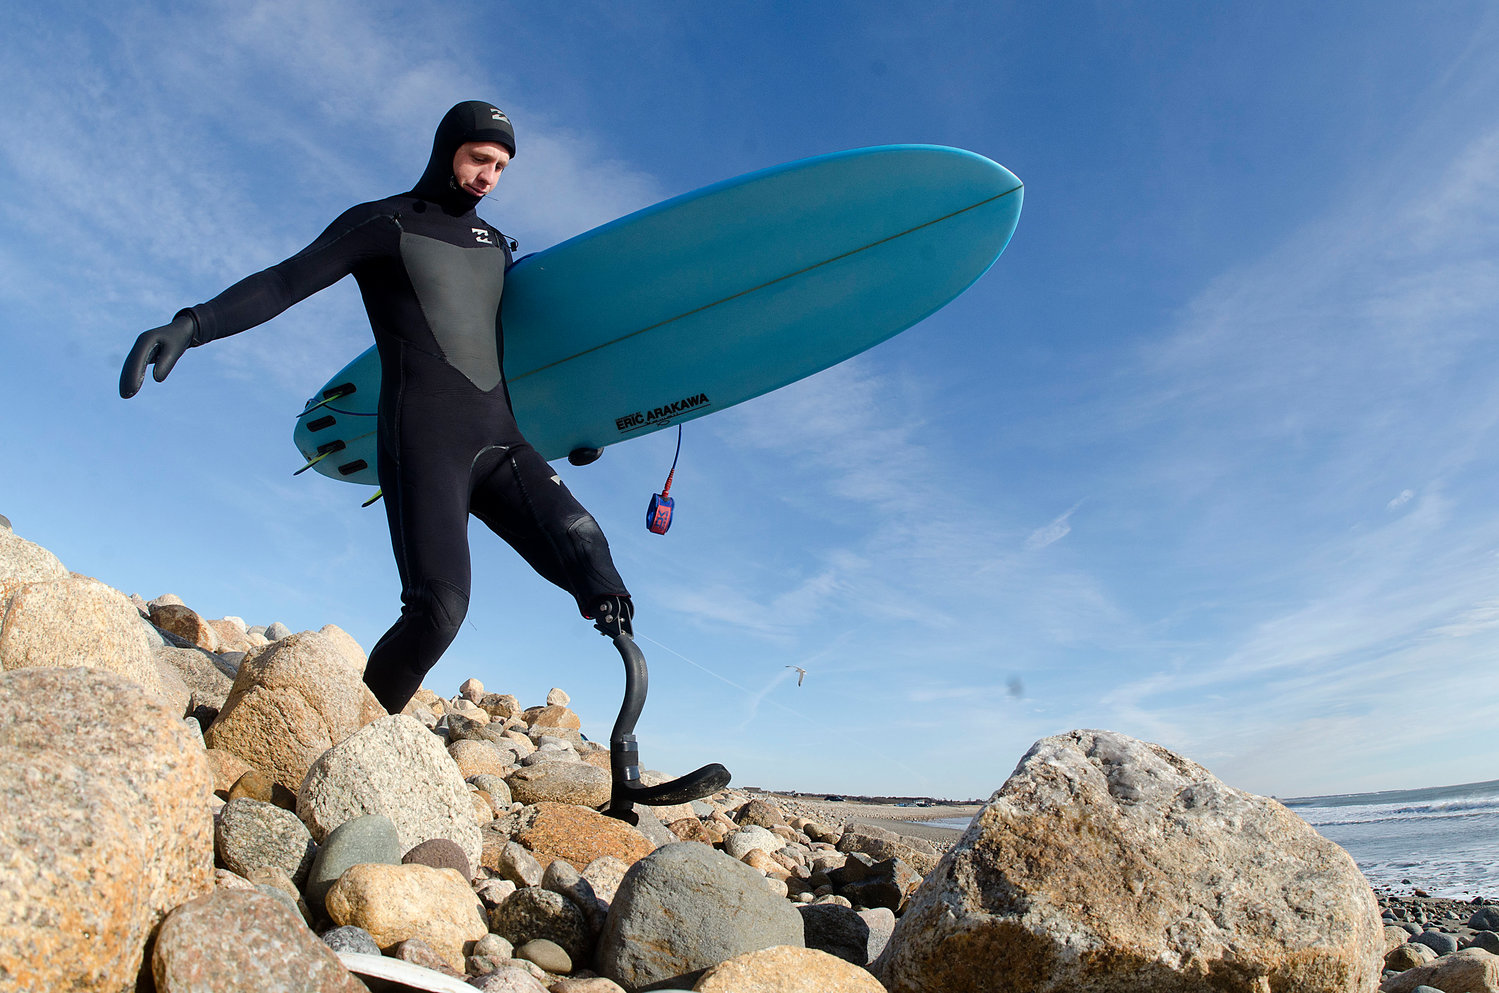 Colin Cook climbs down the rocks at Little Compton’s South Shore Beach nearly two years after the shark attack that claimed part of his left leg. He’s wearing an early-version carbon fiber limb designed and built for him by Sakonnet area friends especially for use while surfing.